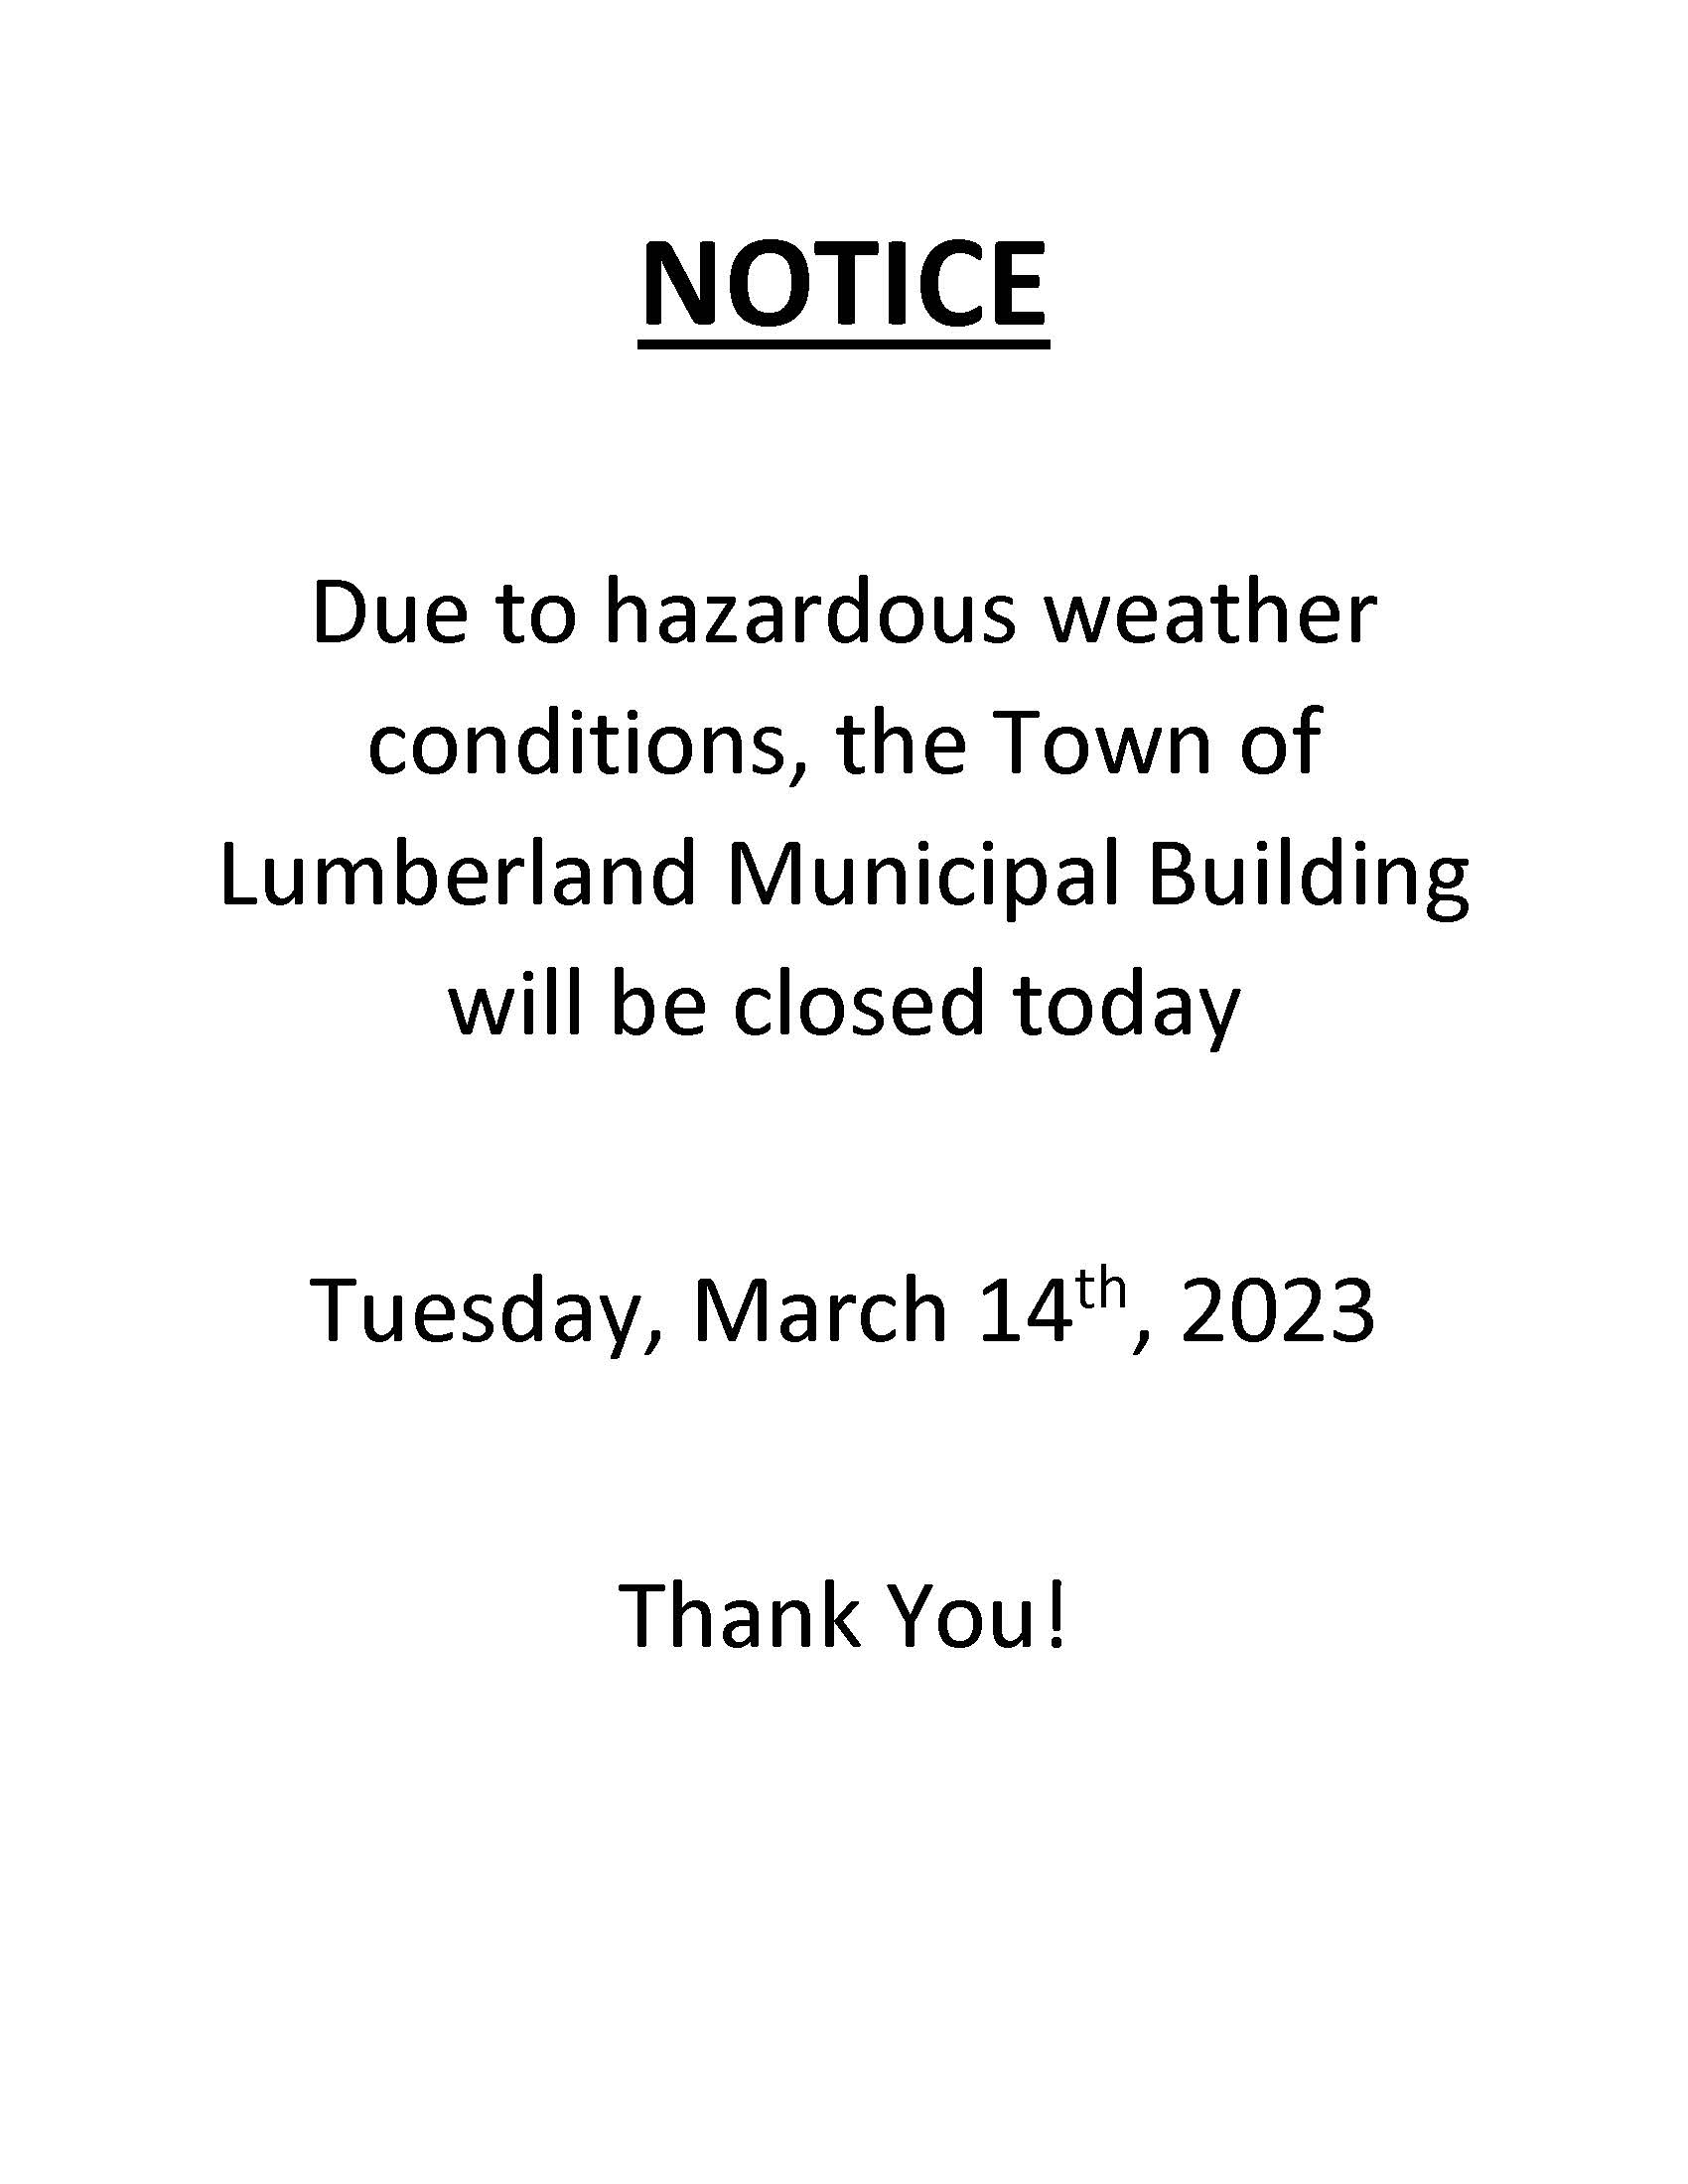 Weather Closure Template - March 14 2023